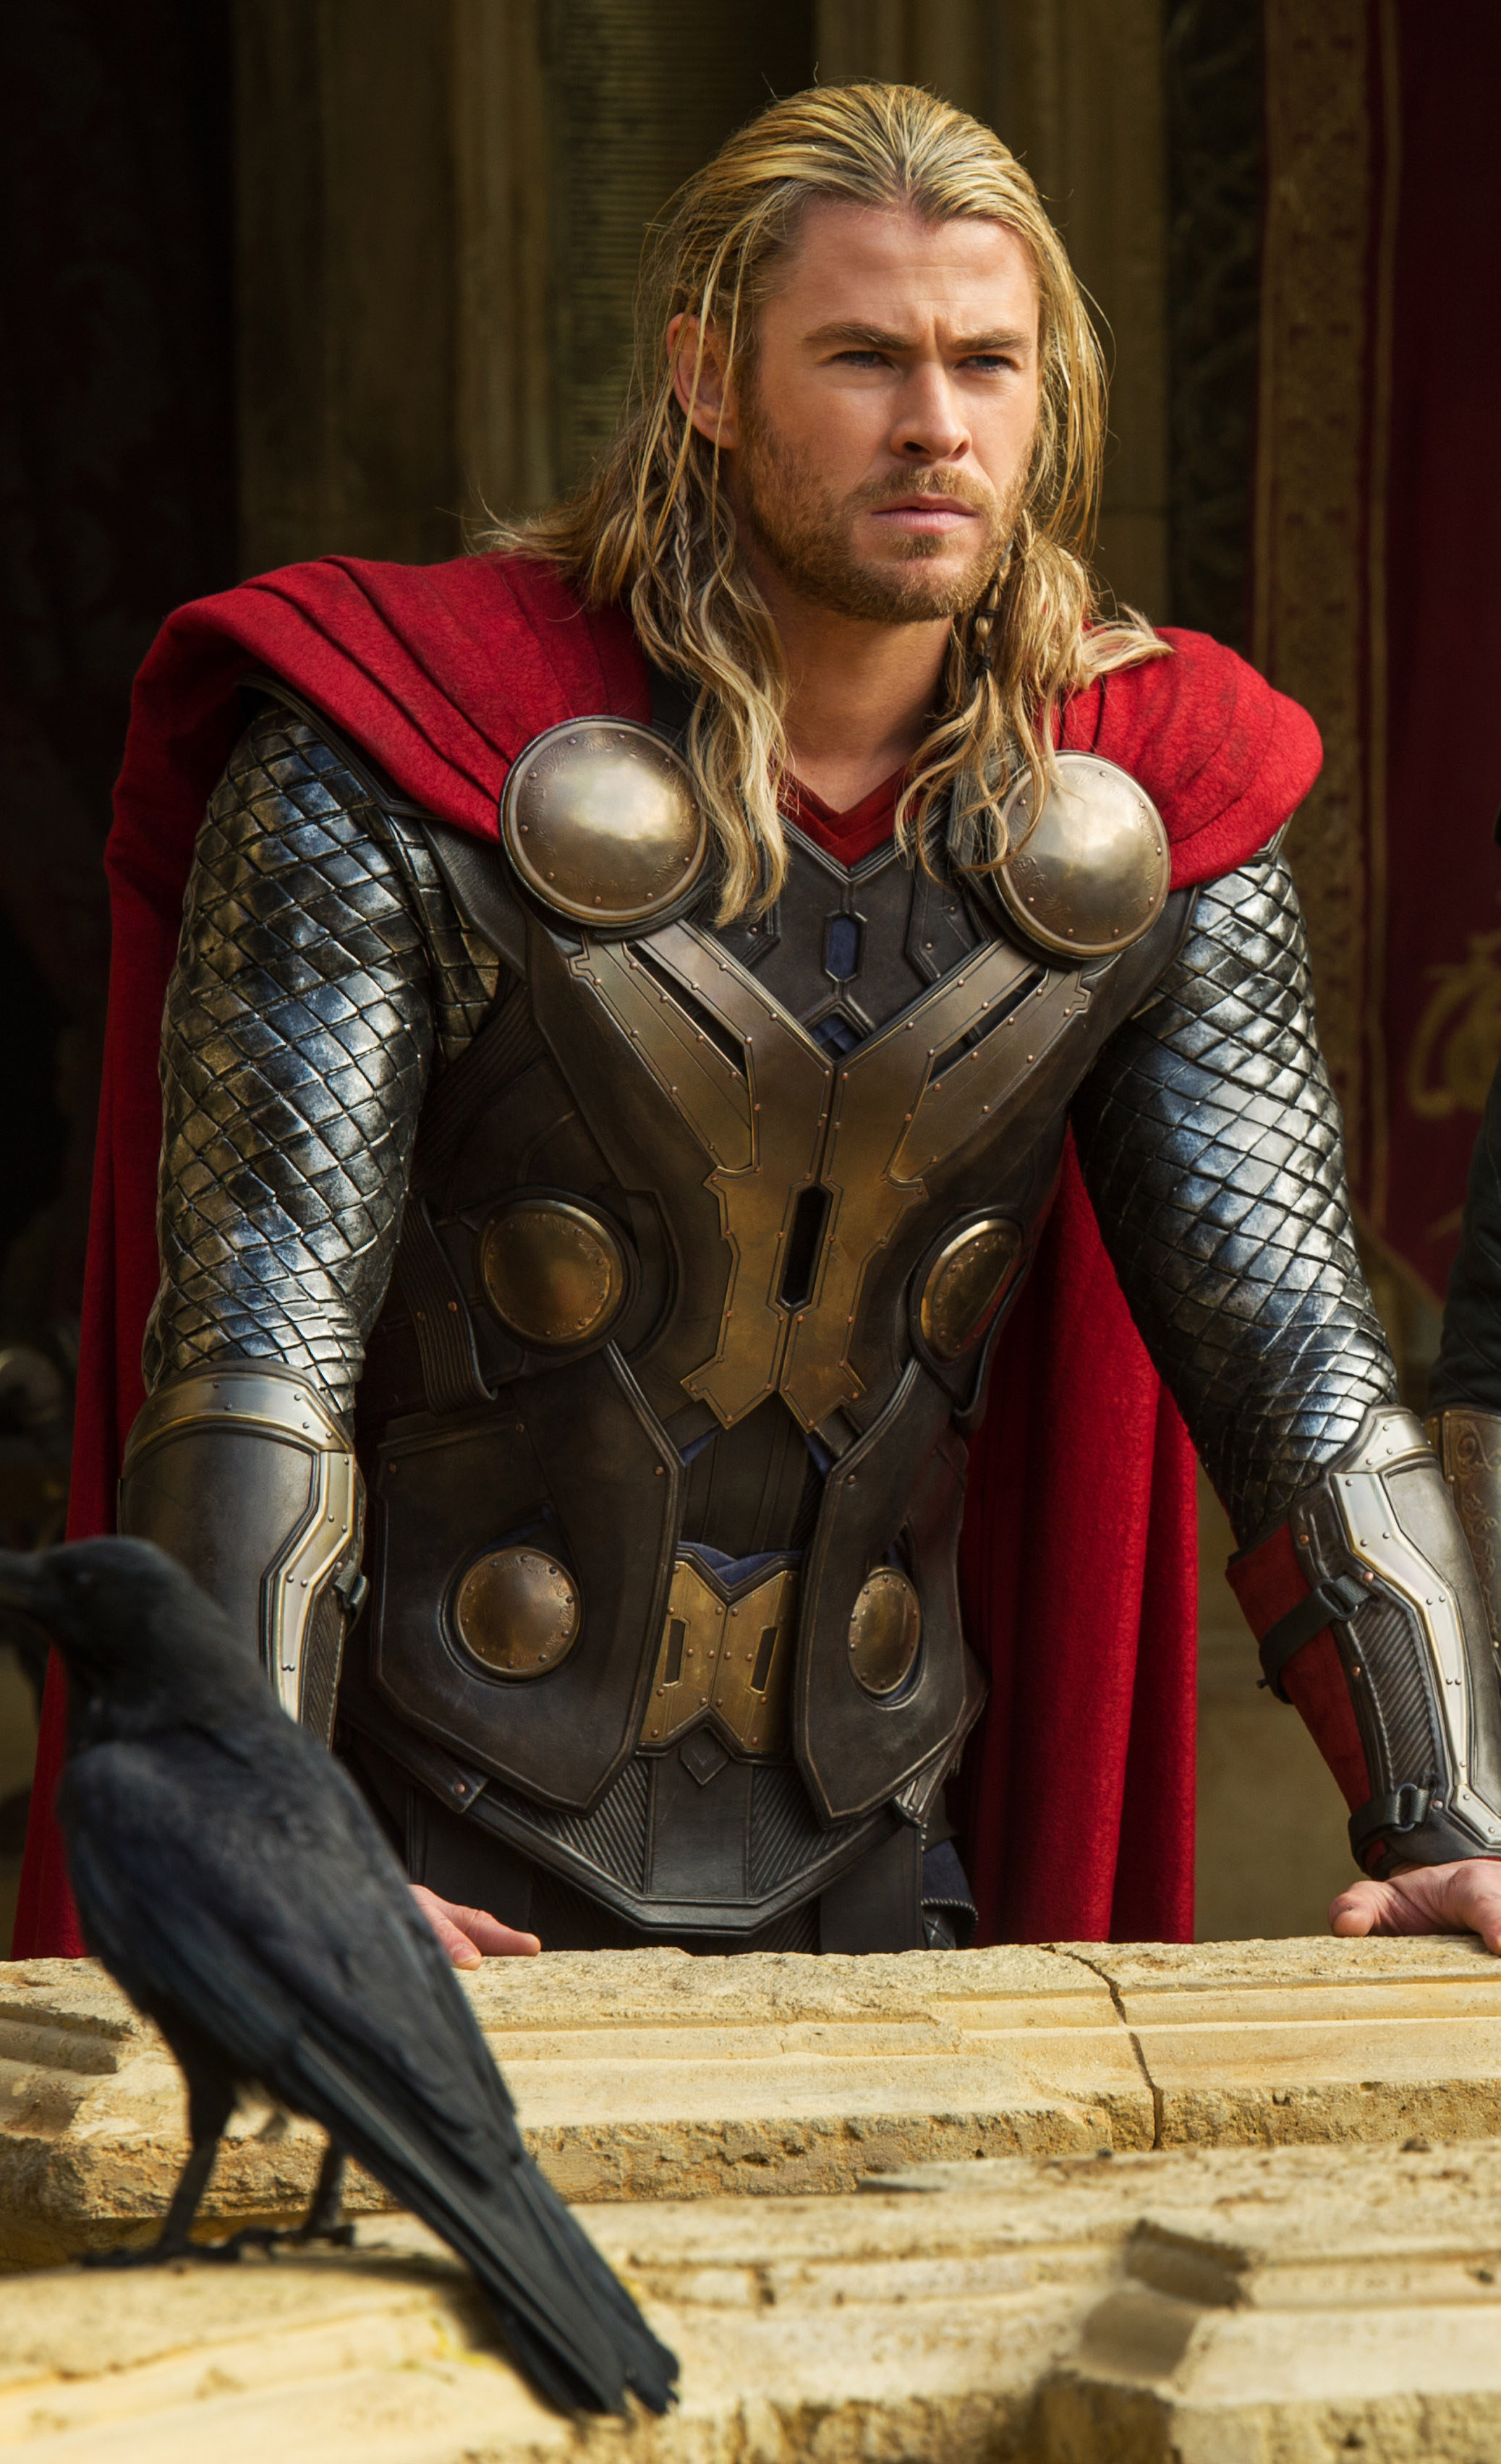 Thor wearing his classic outfit